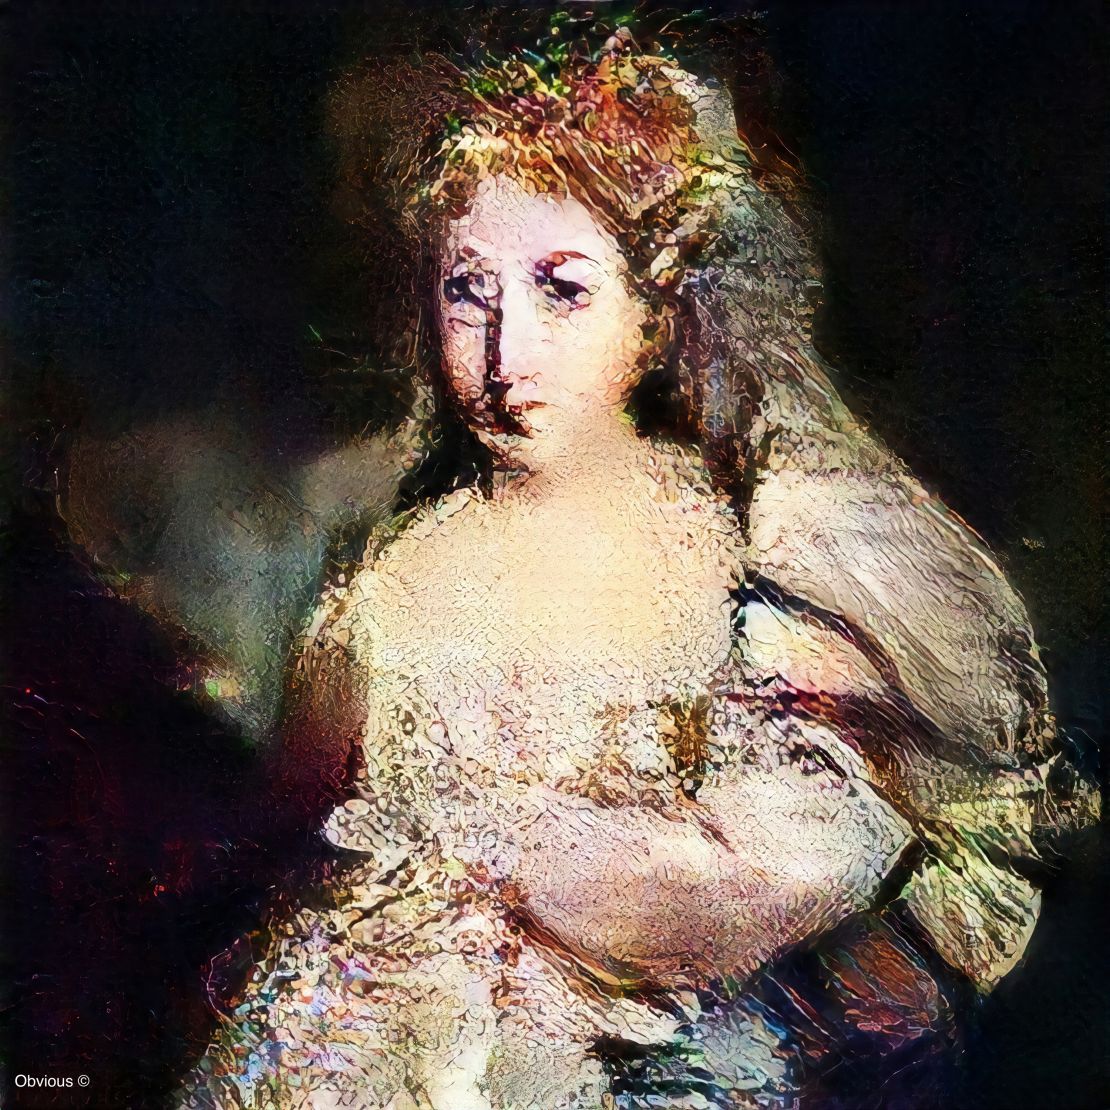 Software by French art collective Obvious "trained" itself using a set of historical paintings for reference, before producing an image that resembles an 18th-century portrait, though it is itself entirely new.